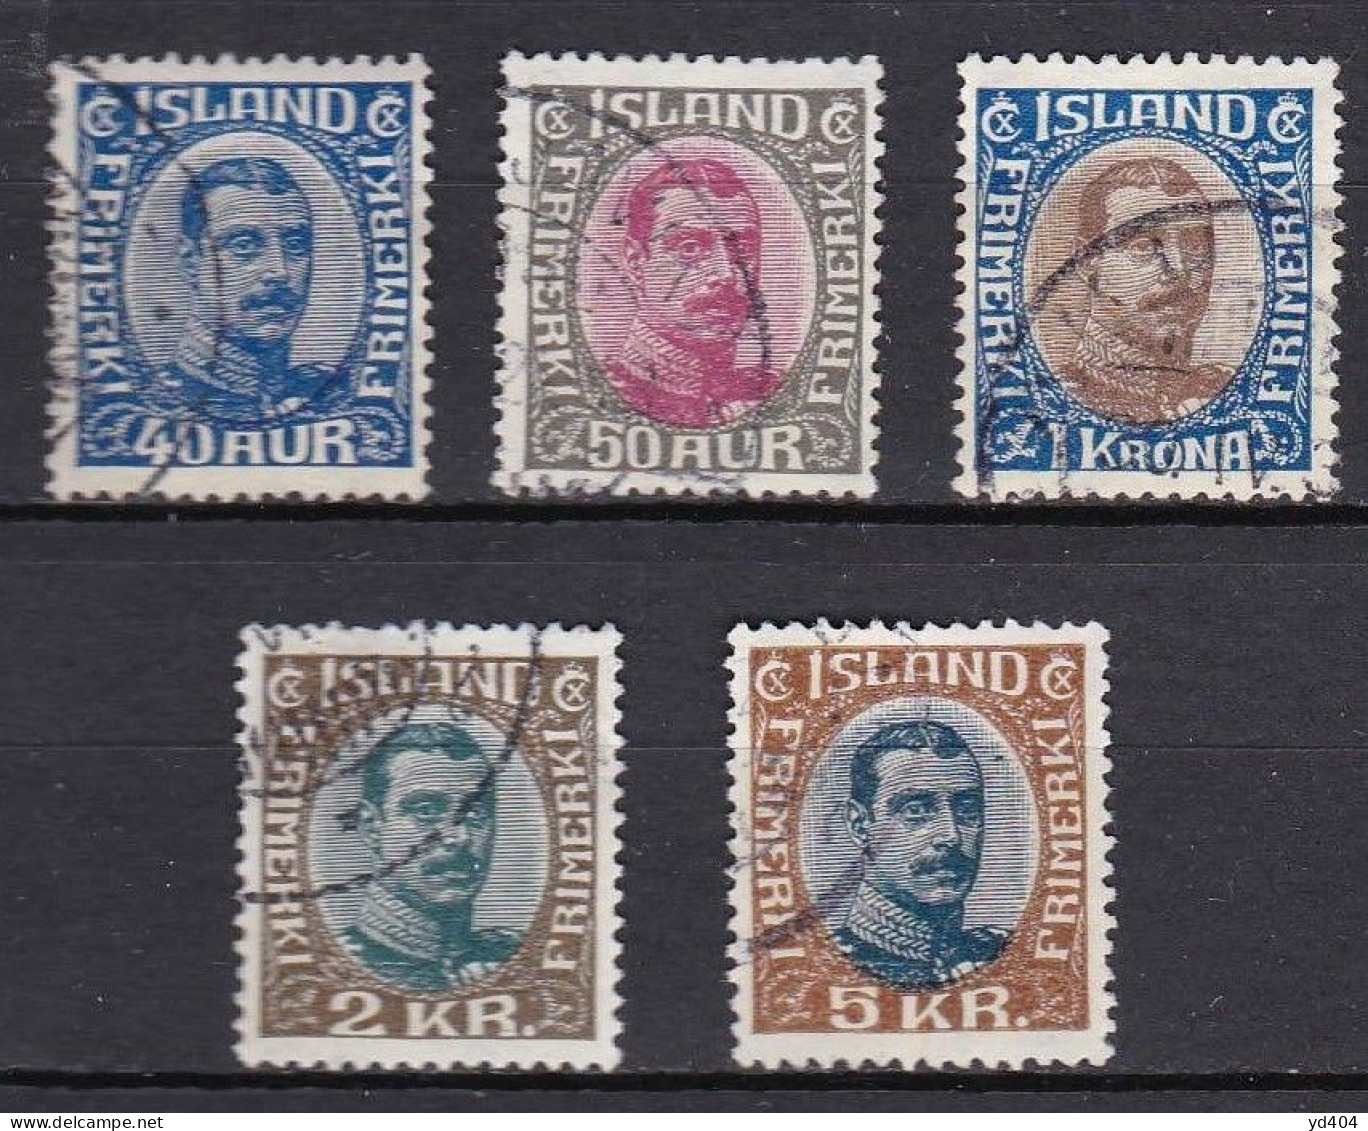 IS014 – ISLANDE – ICELAND – 1920/22 – KING CHRISTIAN X FULL SET – SC # 108/28 USED 208 € - Used Stamps